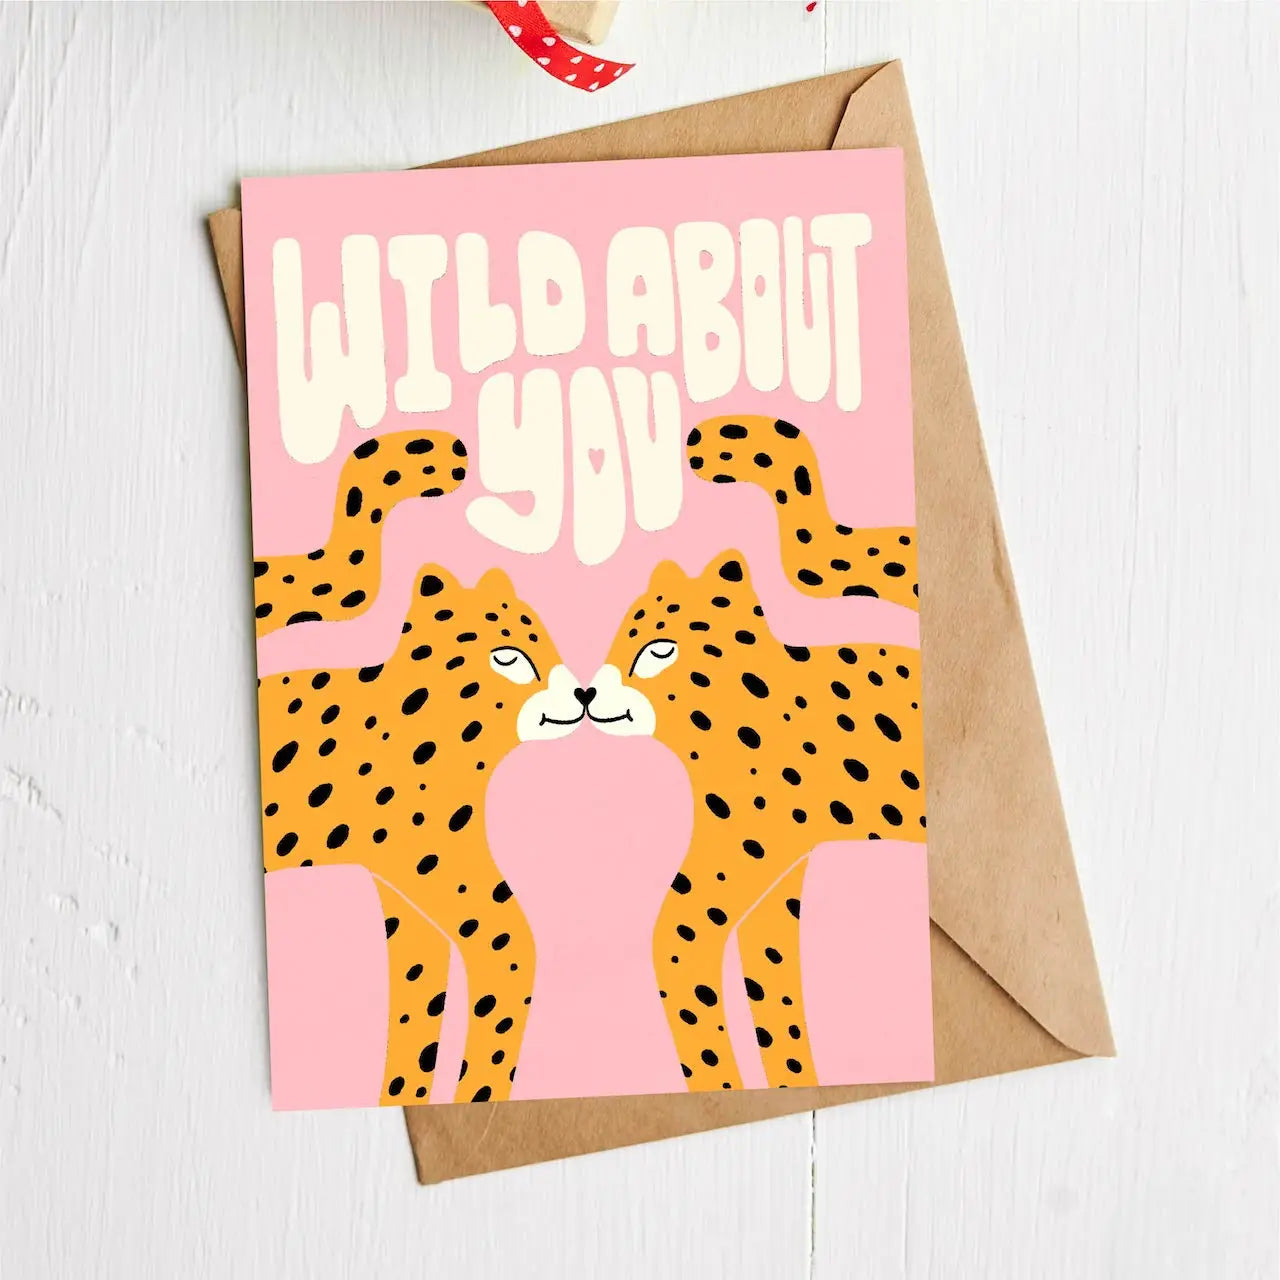 Wild About You - Greeting Card